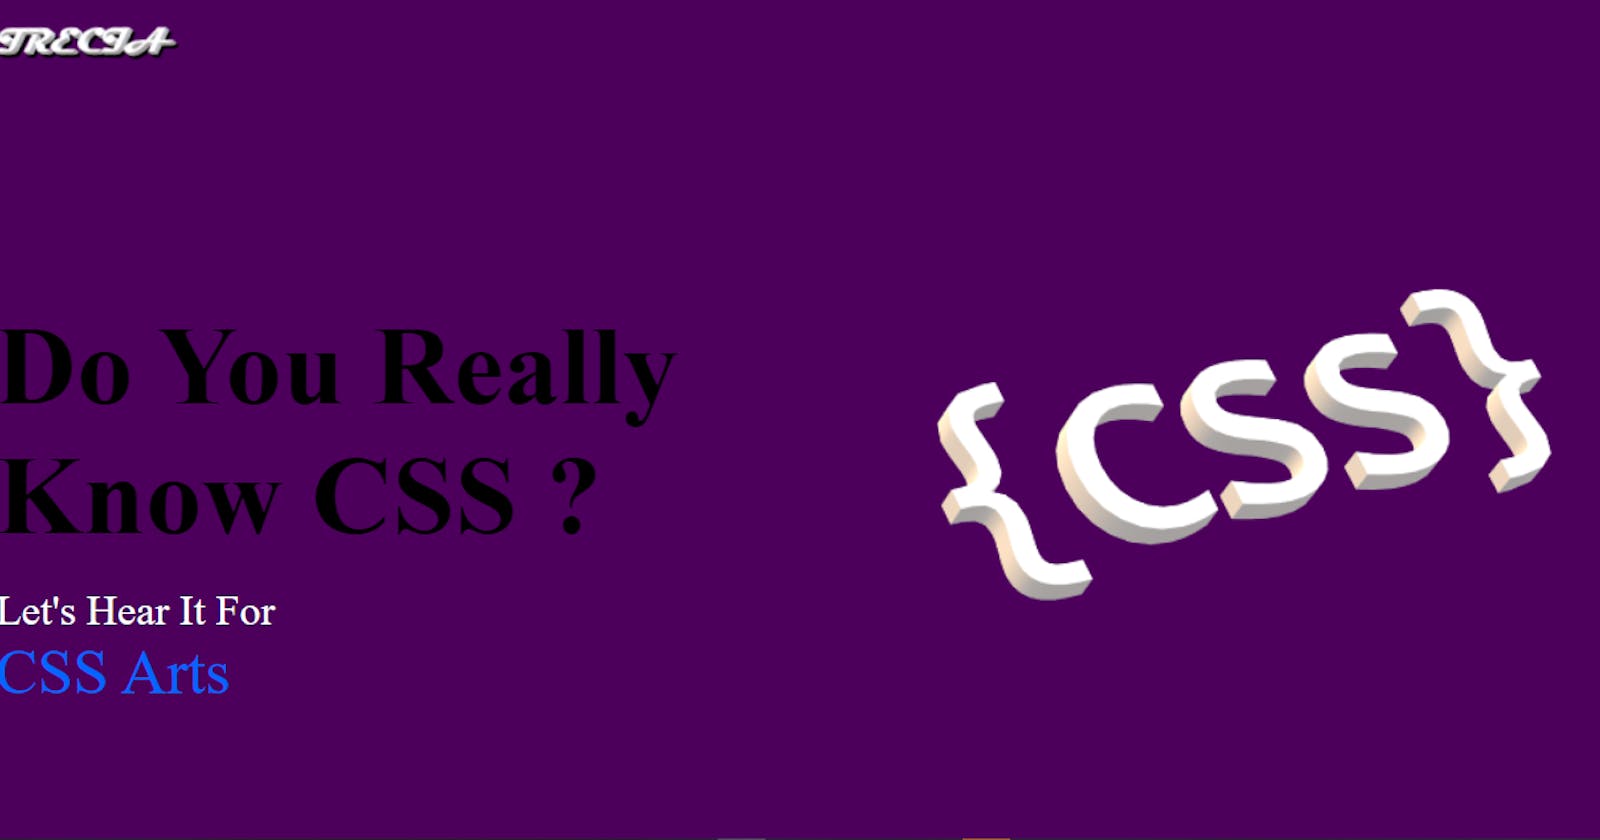 CSS Arts: What's The Deal?